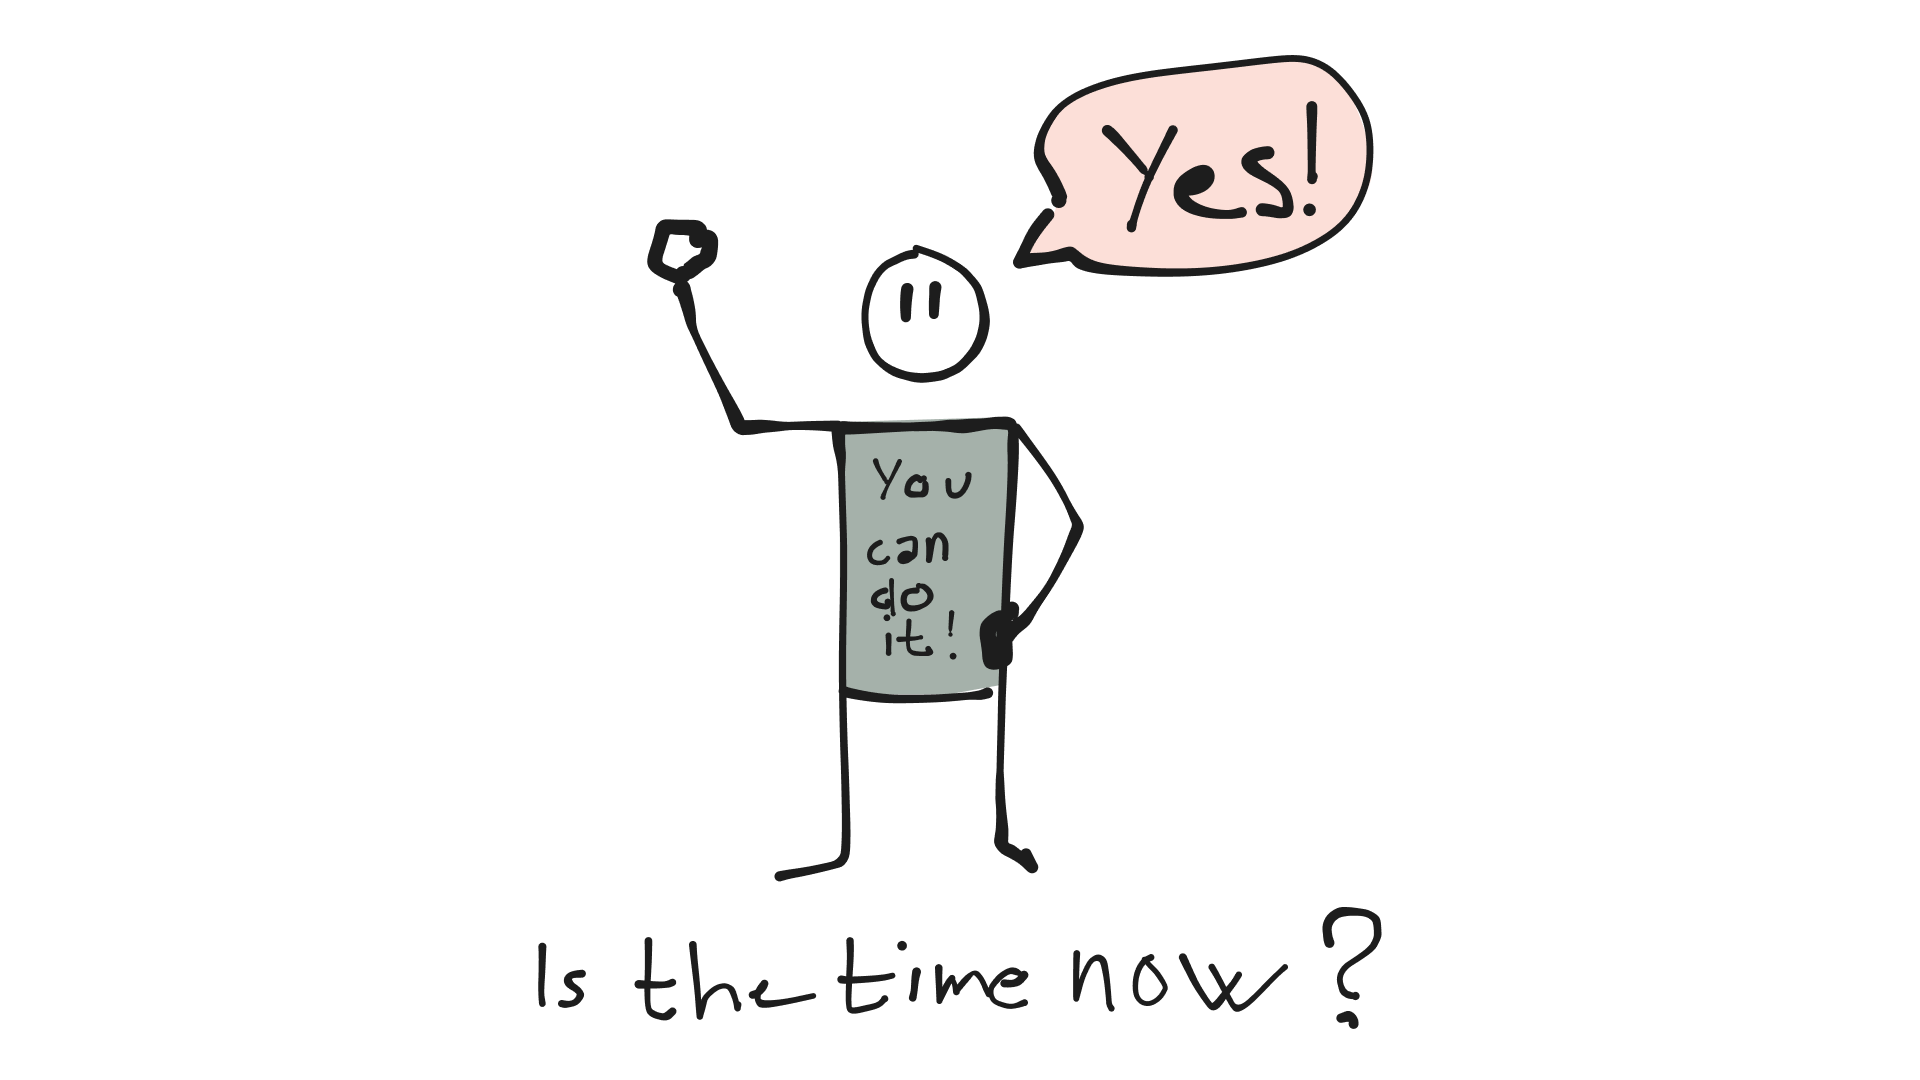 A question written, saying "Is the time now?" a person with a T-shirt saying "You can do it!" that same person saying "Yes!".